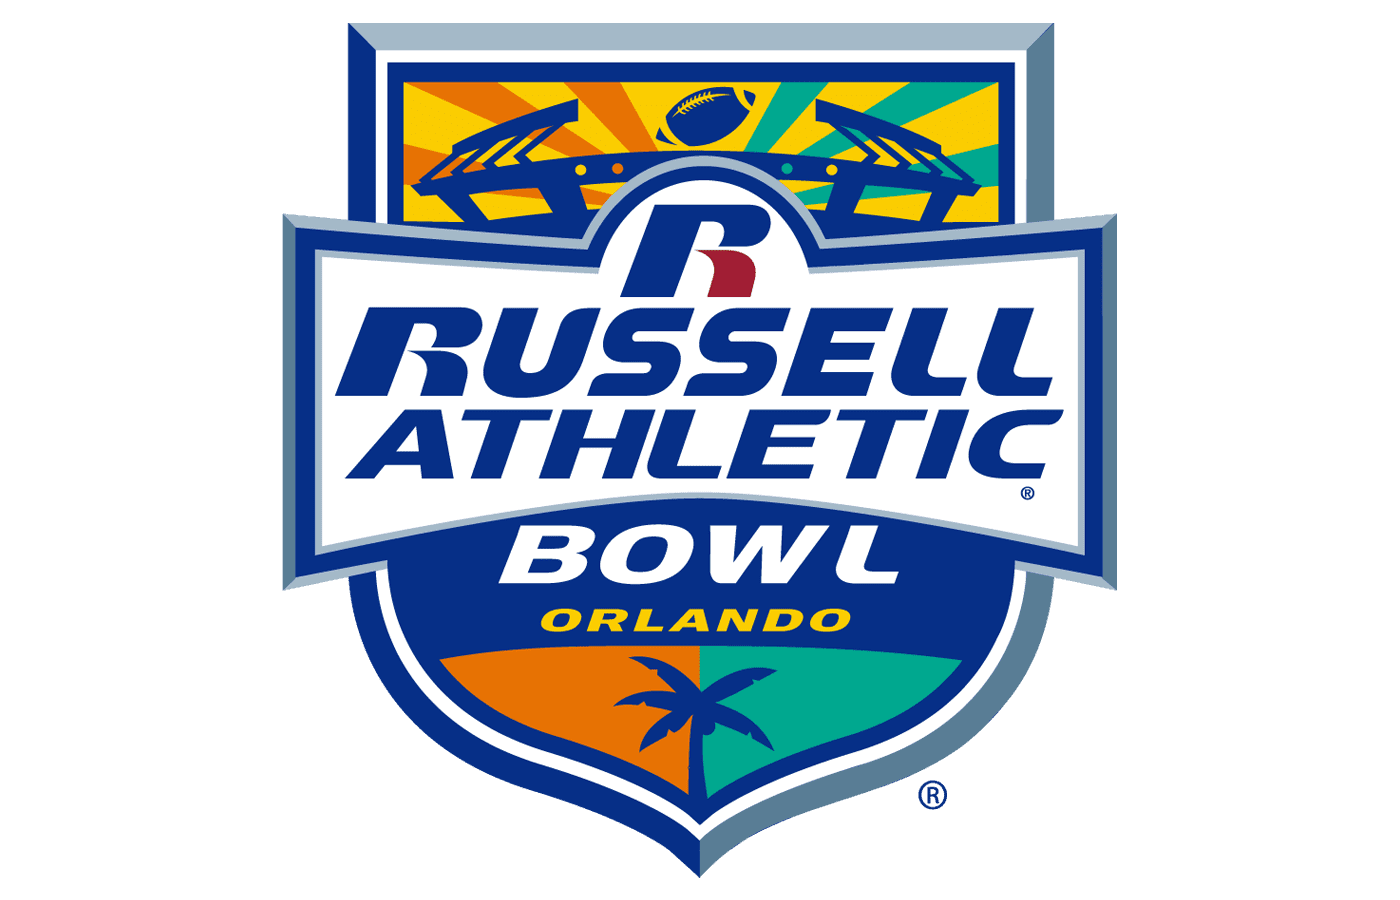 https://1000logos.net/wp-content/uploads/2023/02/Russell-Athletic-Bowl-logo.png